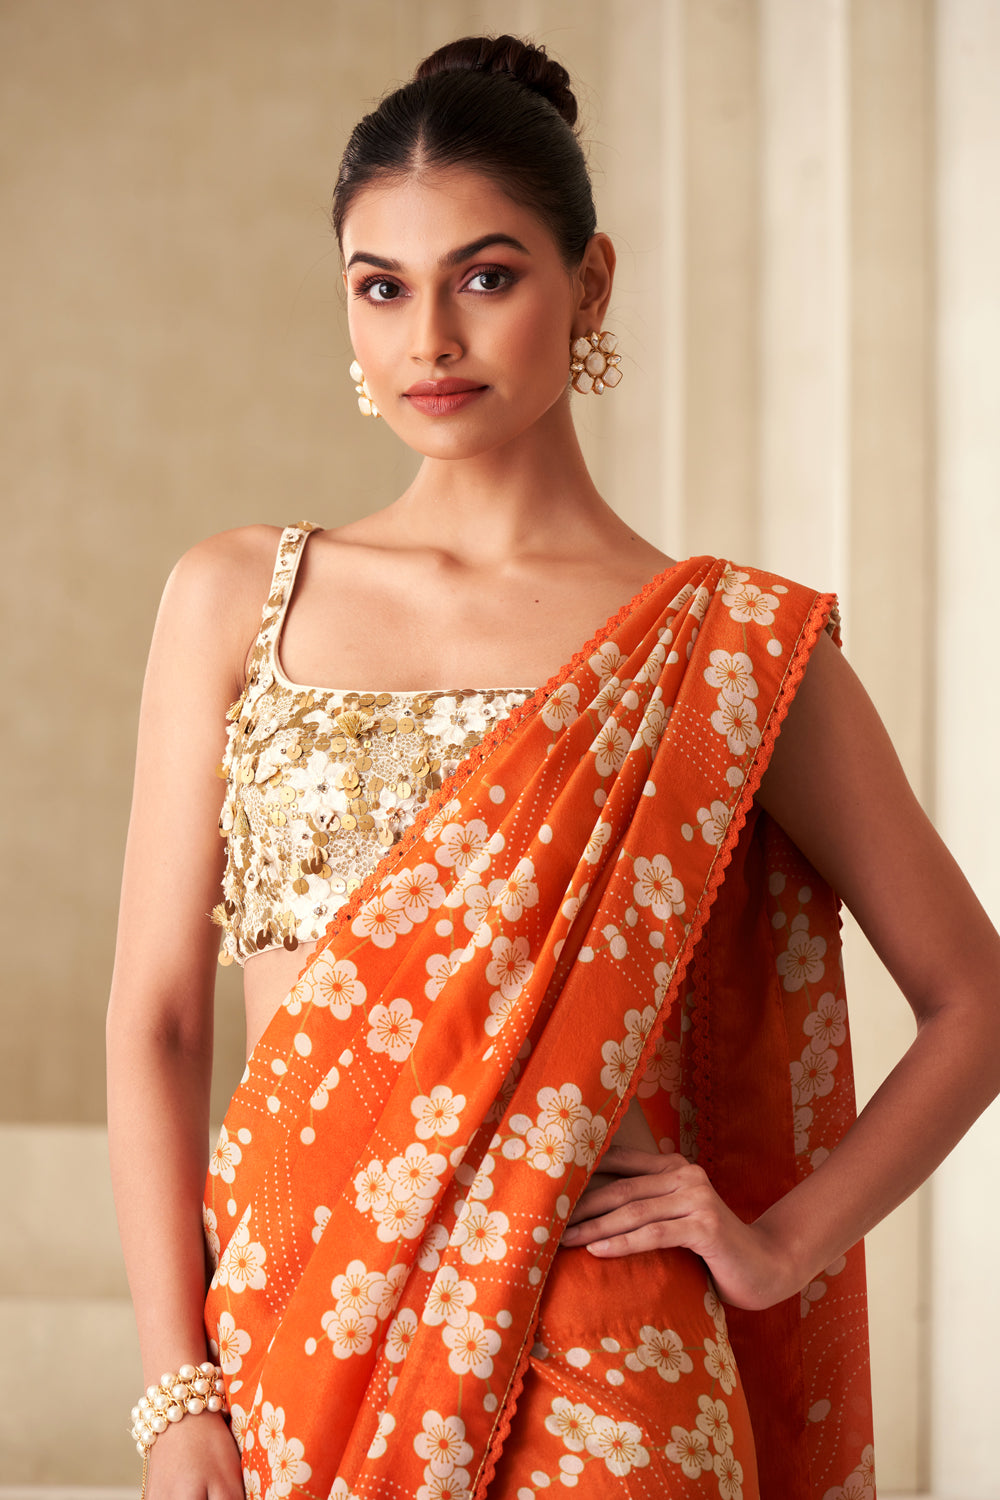 Floral Print Saree With Embroidered Blouse And Belt